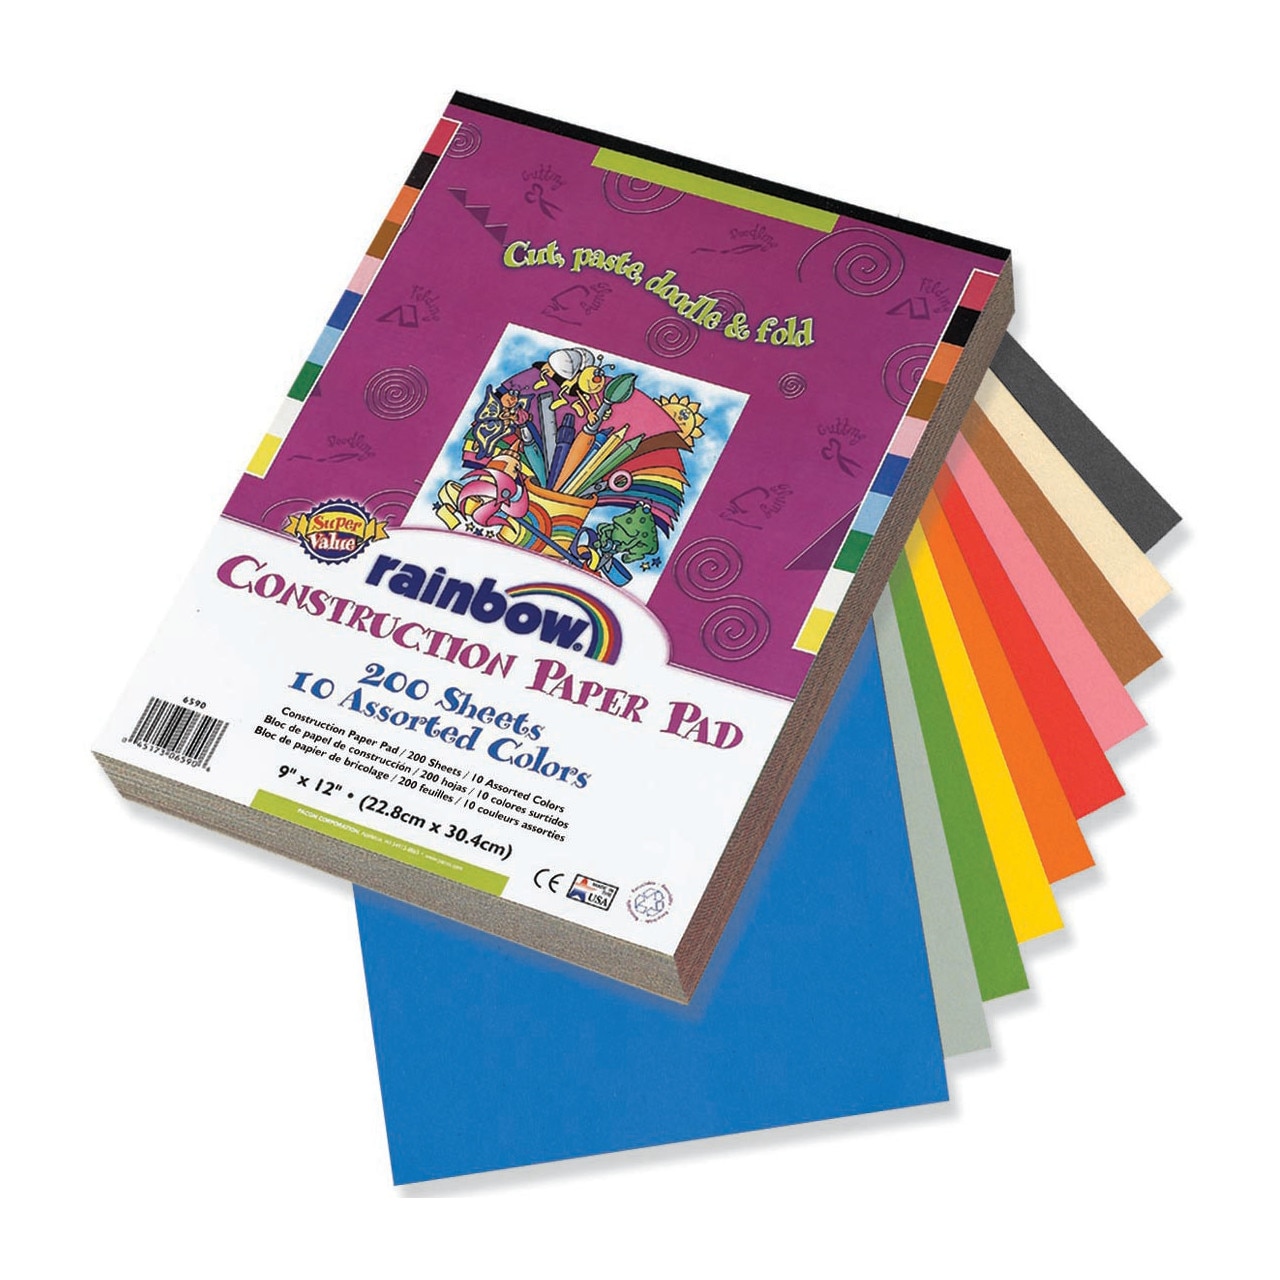 Pacon Construction Paper Pad, 9" x 12", 200 Sheets